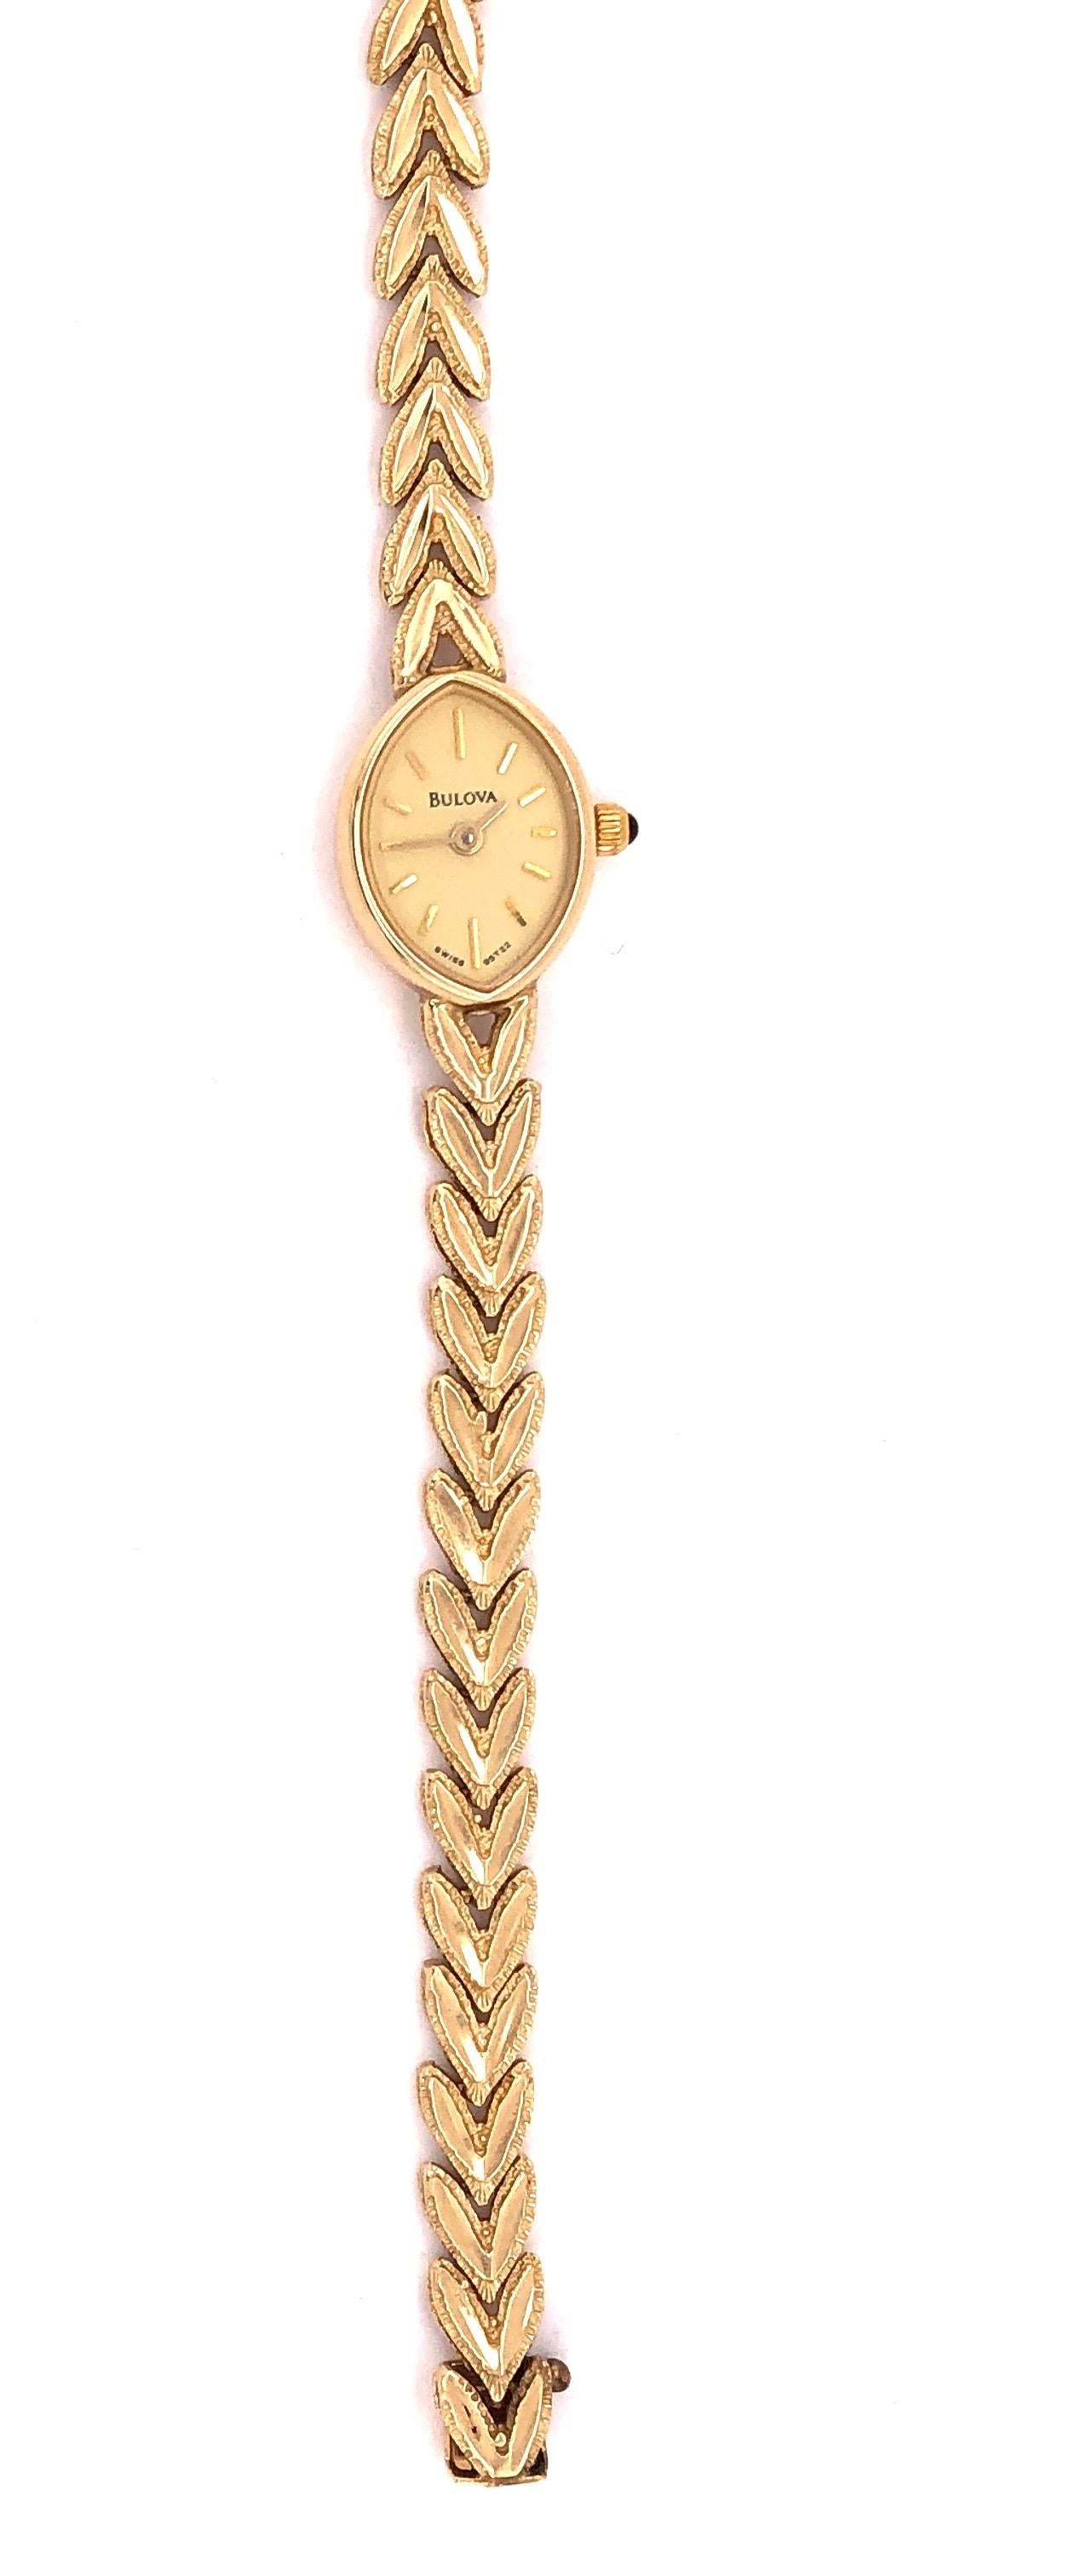 Vintage 14Kt Yellow Gold Bulova Wrist Watch Quartz Ronda 4 Jewels 15.7grams Without works. 17.5 Inches
Bulova was founded and incorporated as the J. Bulova Company in 1875 by Bohemian immigrant Joseph Bulova (b. Joseph Bullowa, son of Nathan Bullowa